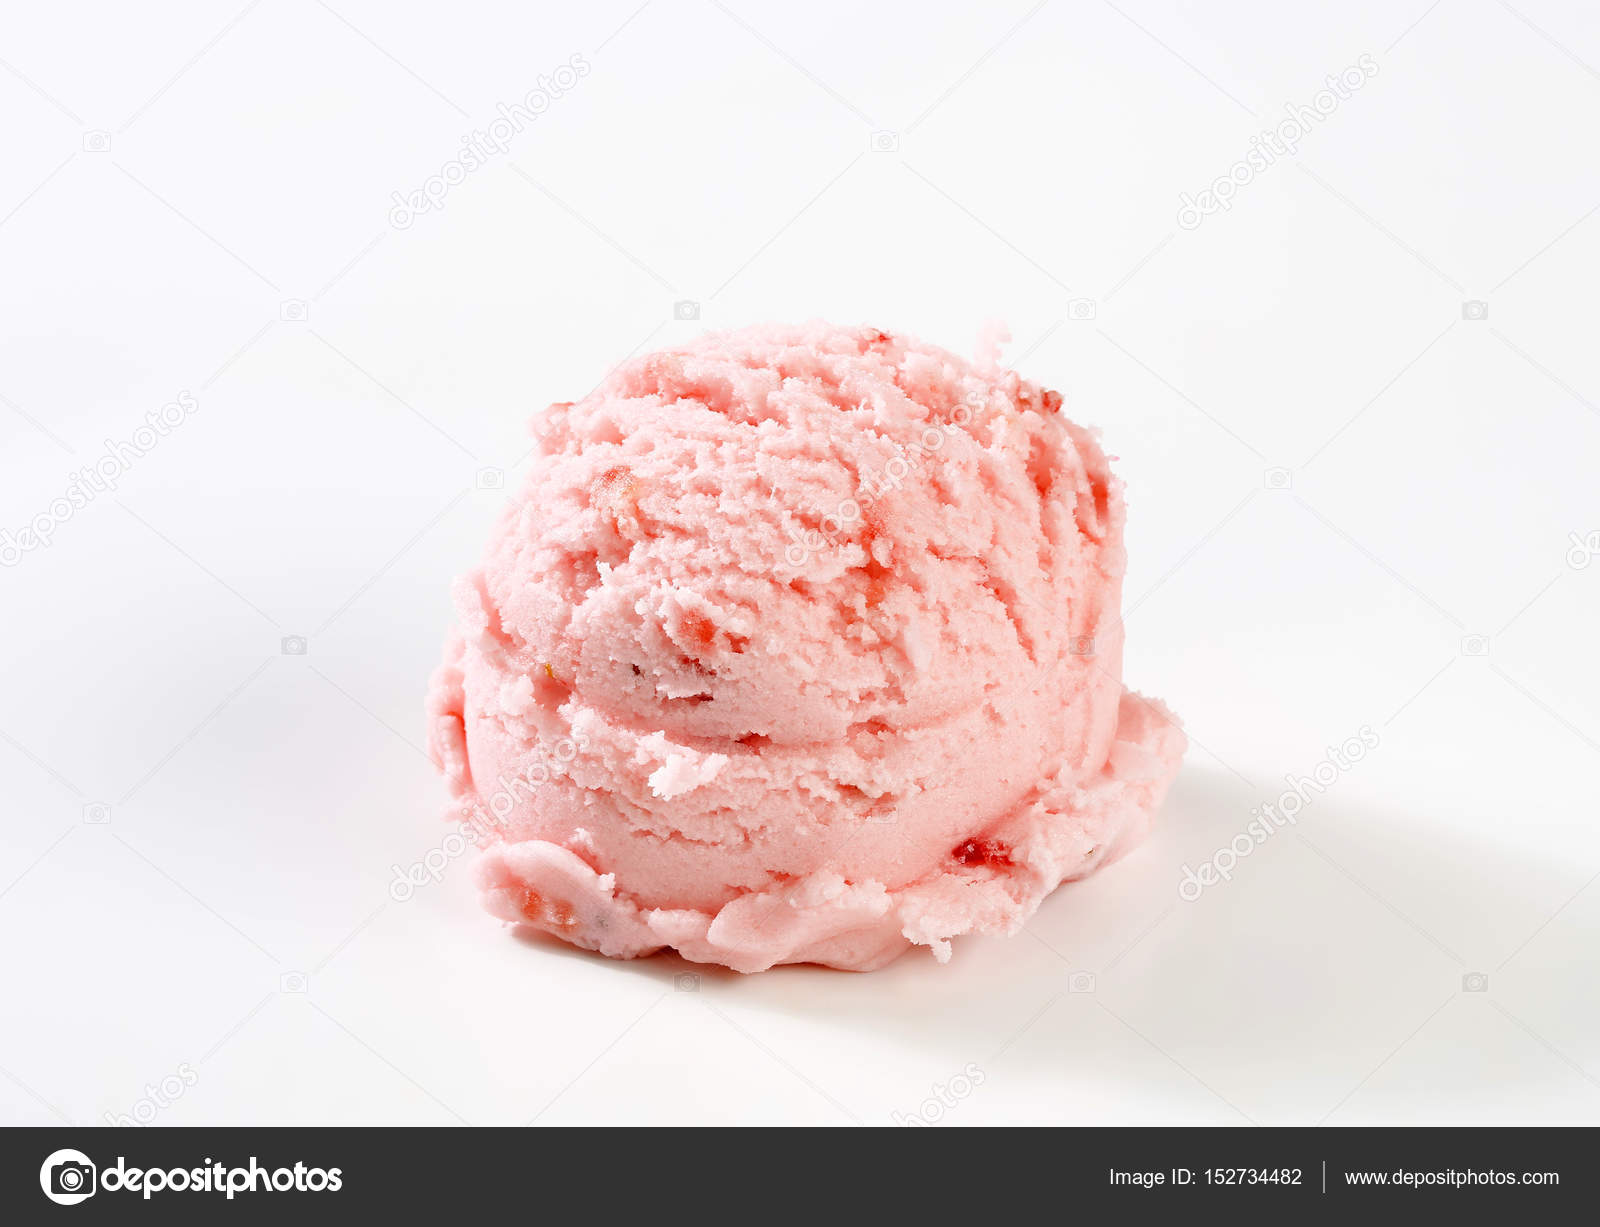 Scoop of pink ice cream Stock Photo by ©ajafoto 152734482